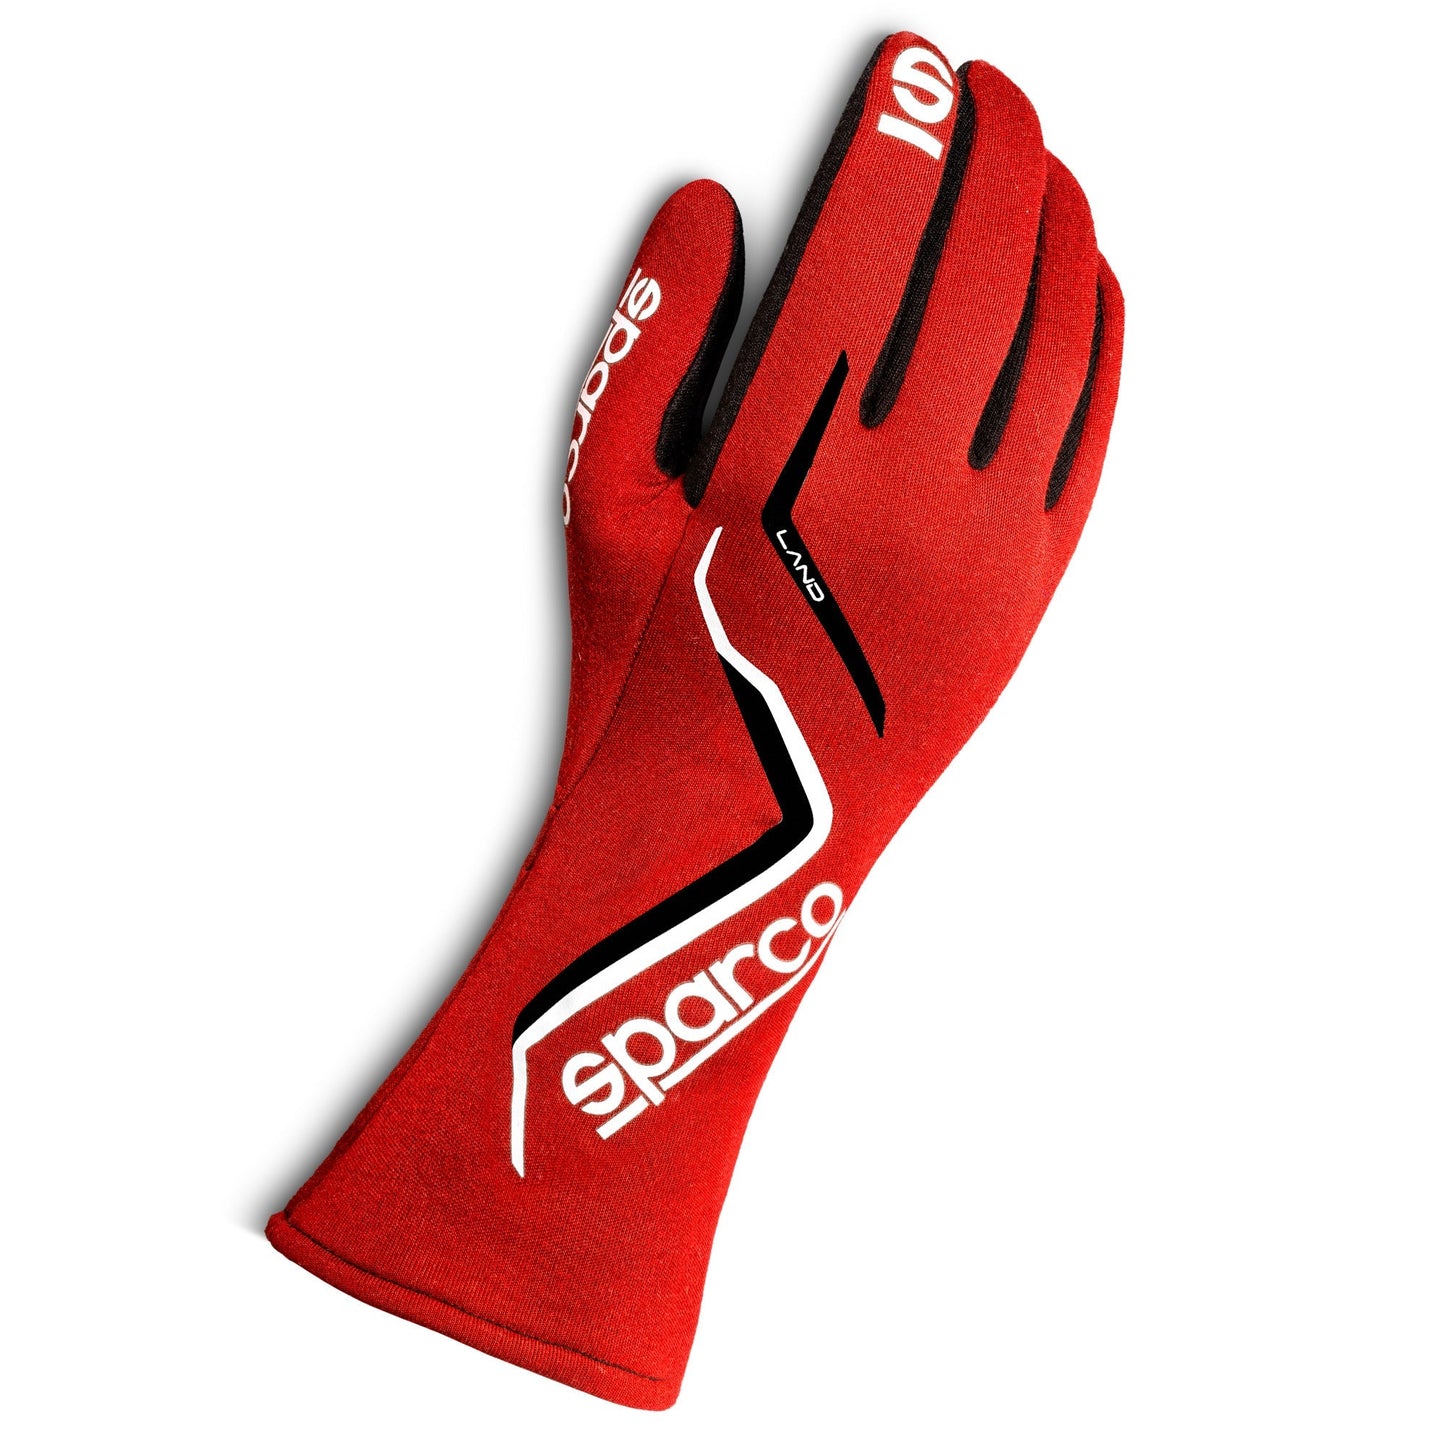 Sparco Land Racing Gloves - 2021 Model